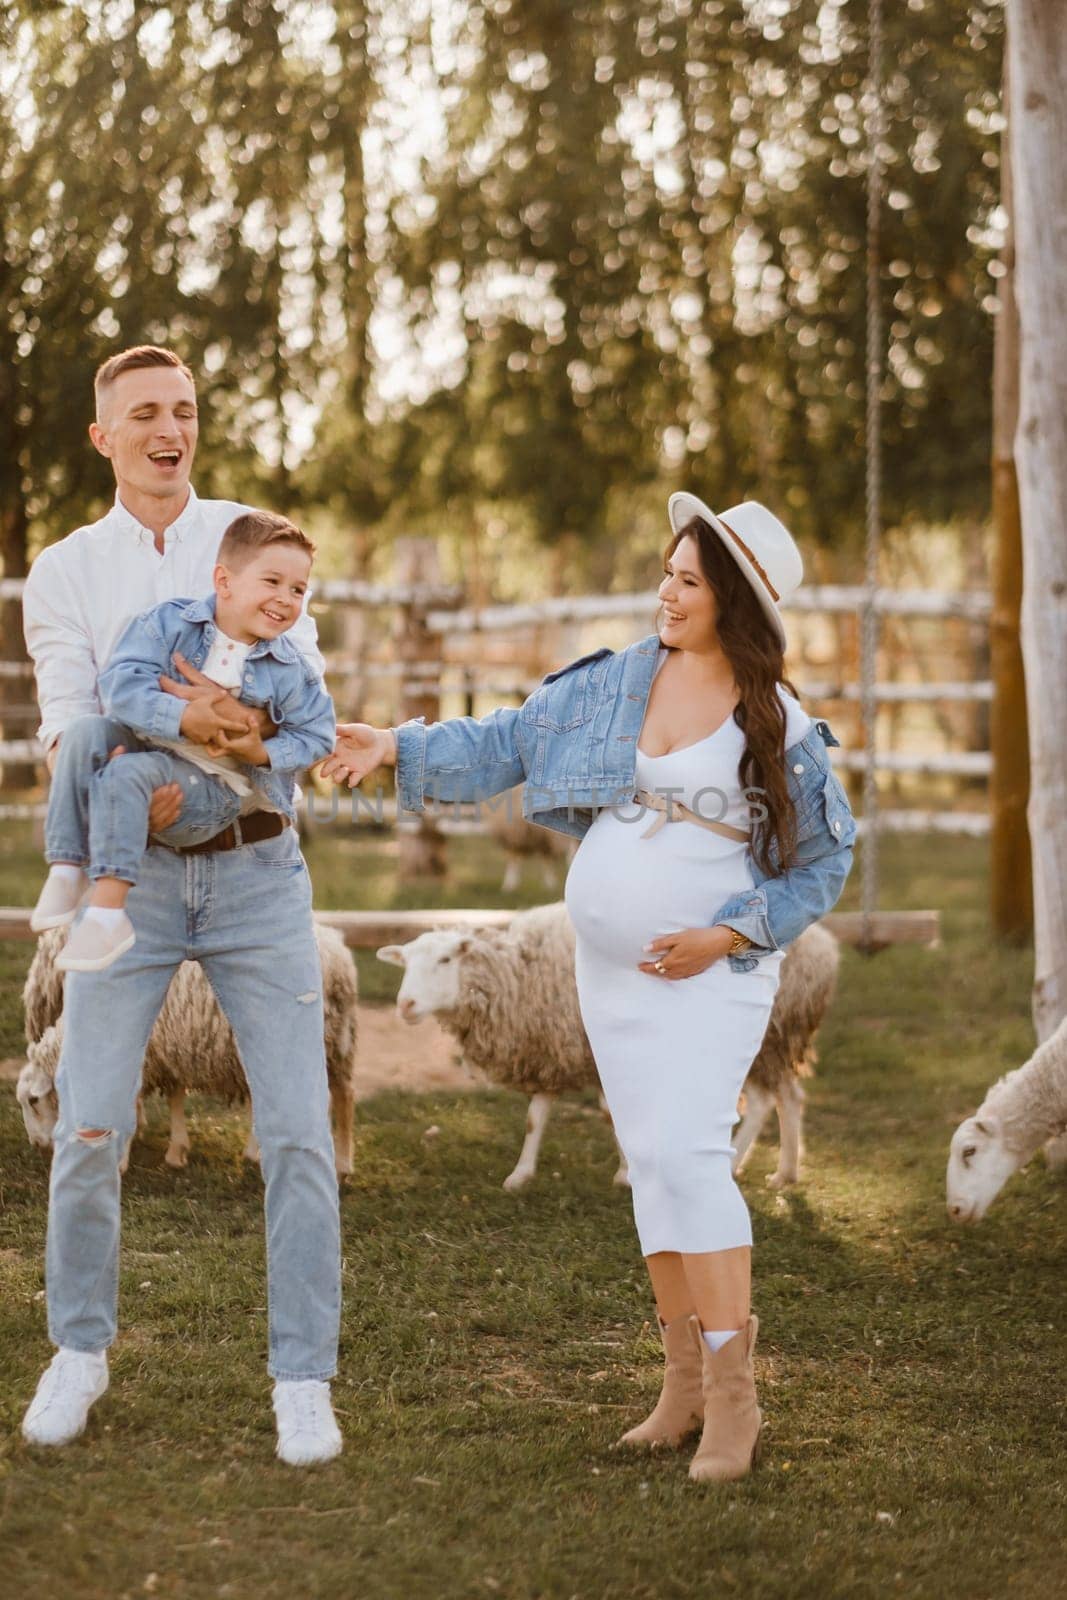 Stylish family in summer on a village farm with sheep.